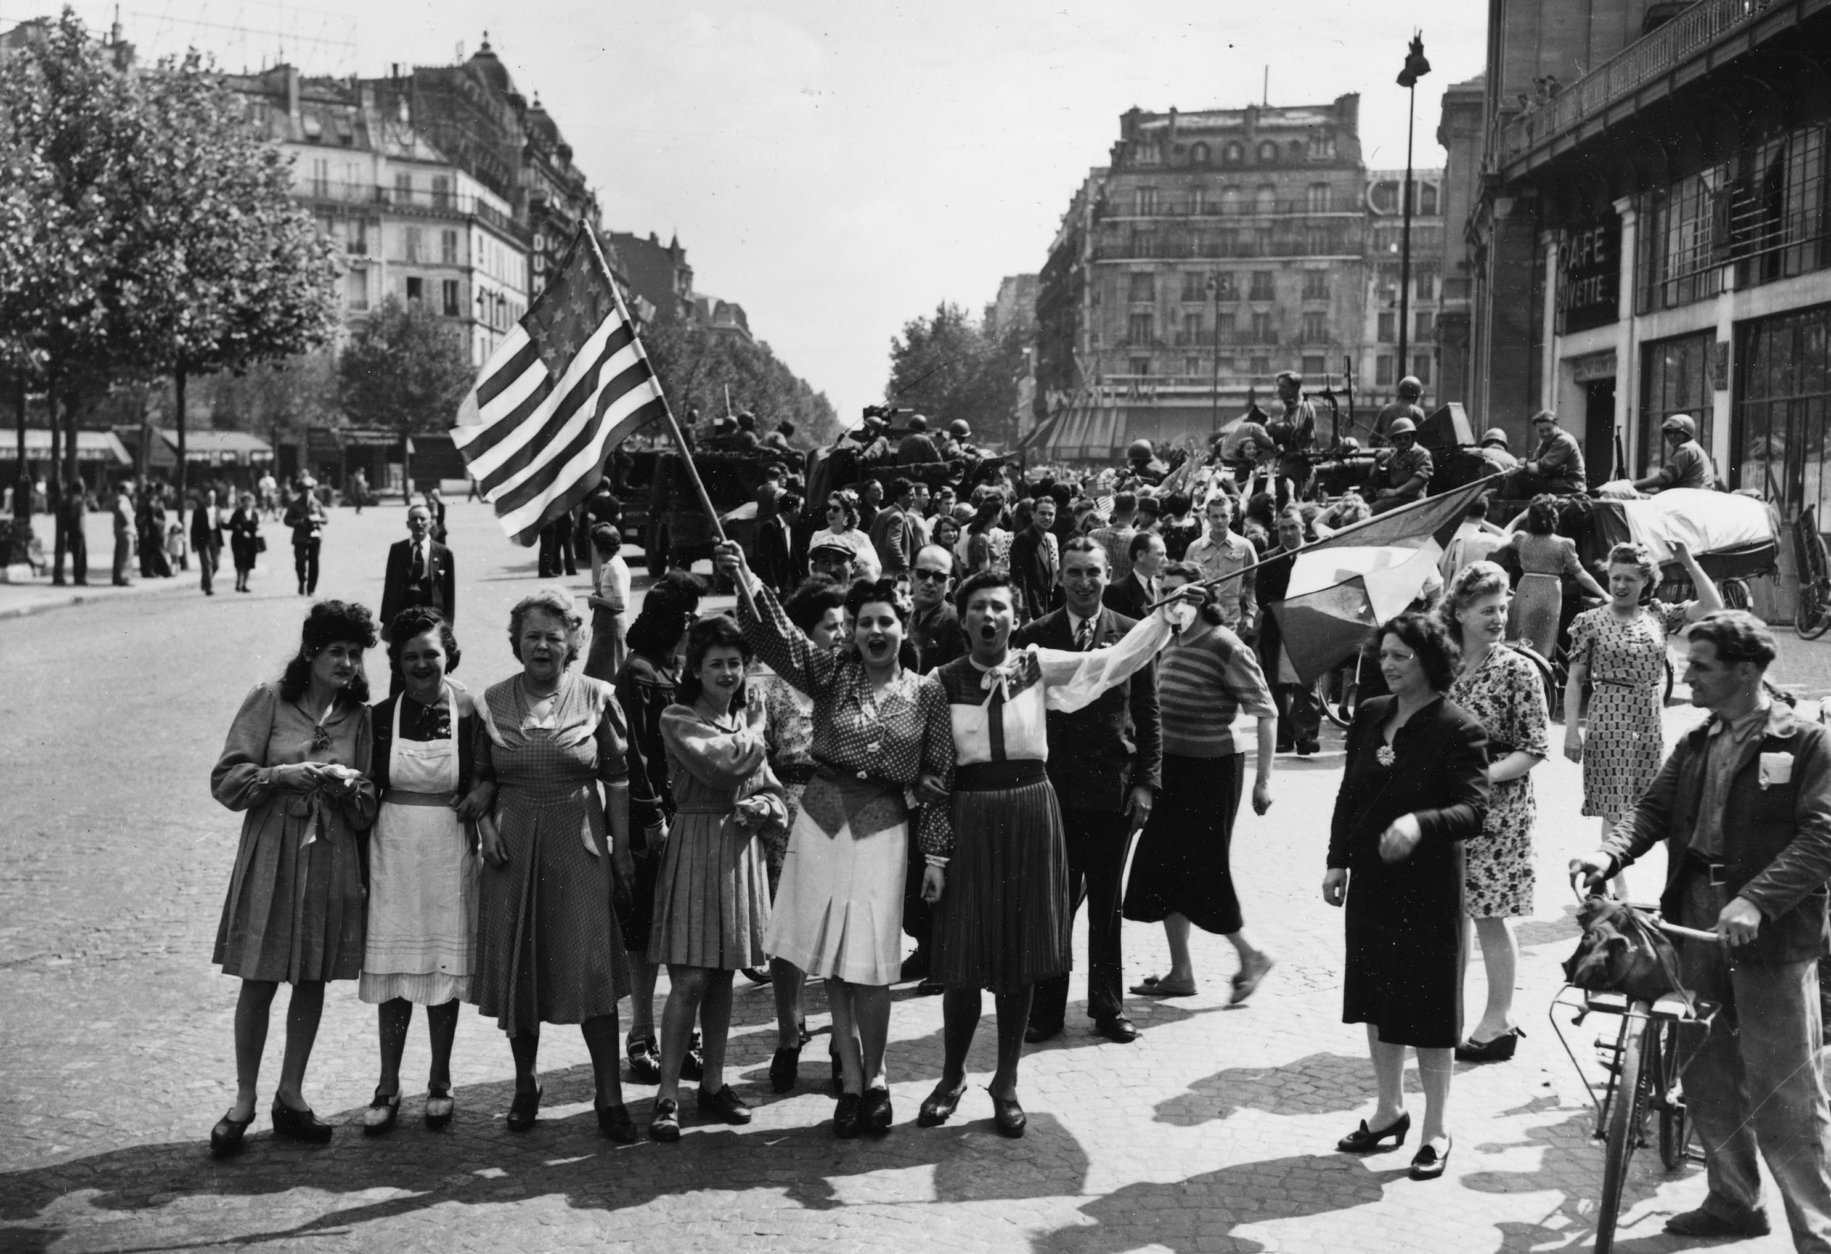 French civilians with their hastily made American and French flags sing the "Star Spangled Banner" as they greet U.S. and Free French troops entering Paris, France, Aug. 25, 1944, after Allied liberation of the French capital from Nazi occupation in World War II.  (AP Photo/Harry Harris)